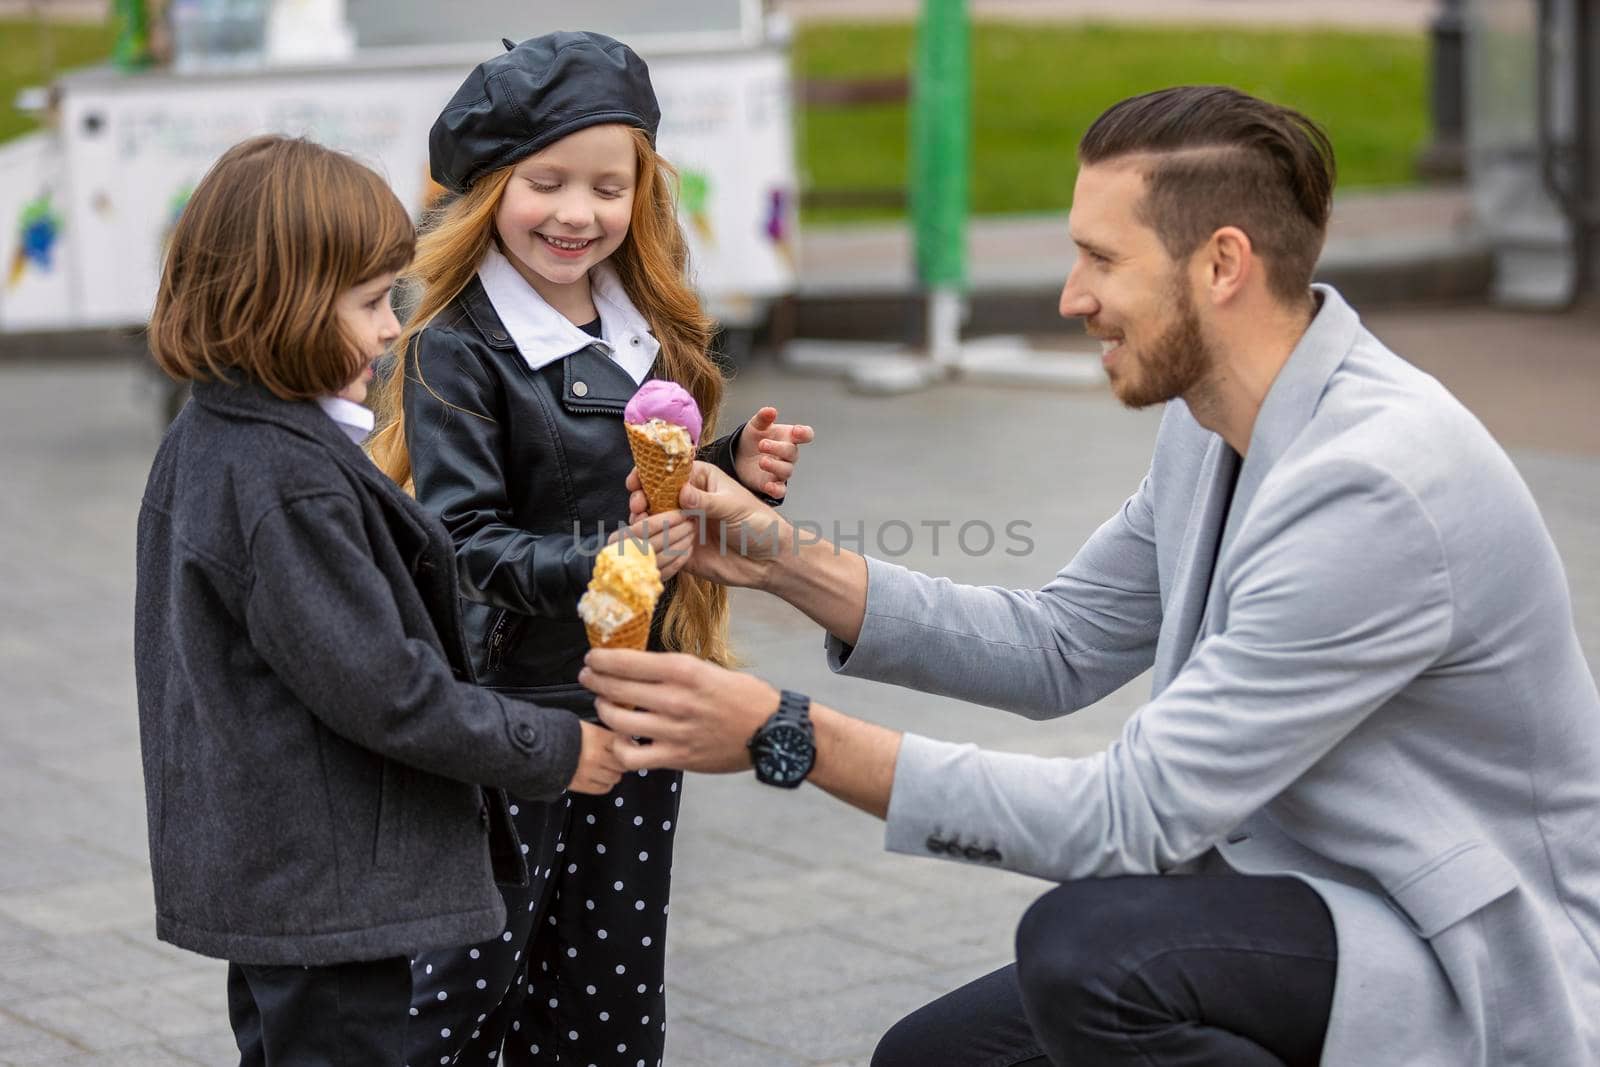 Man gives ice cream to children on the street